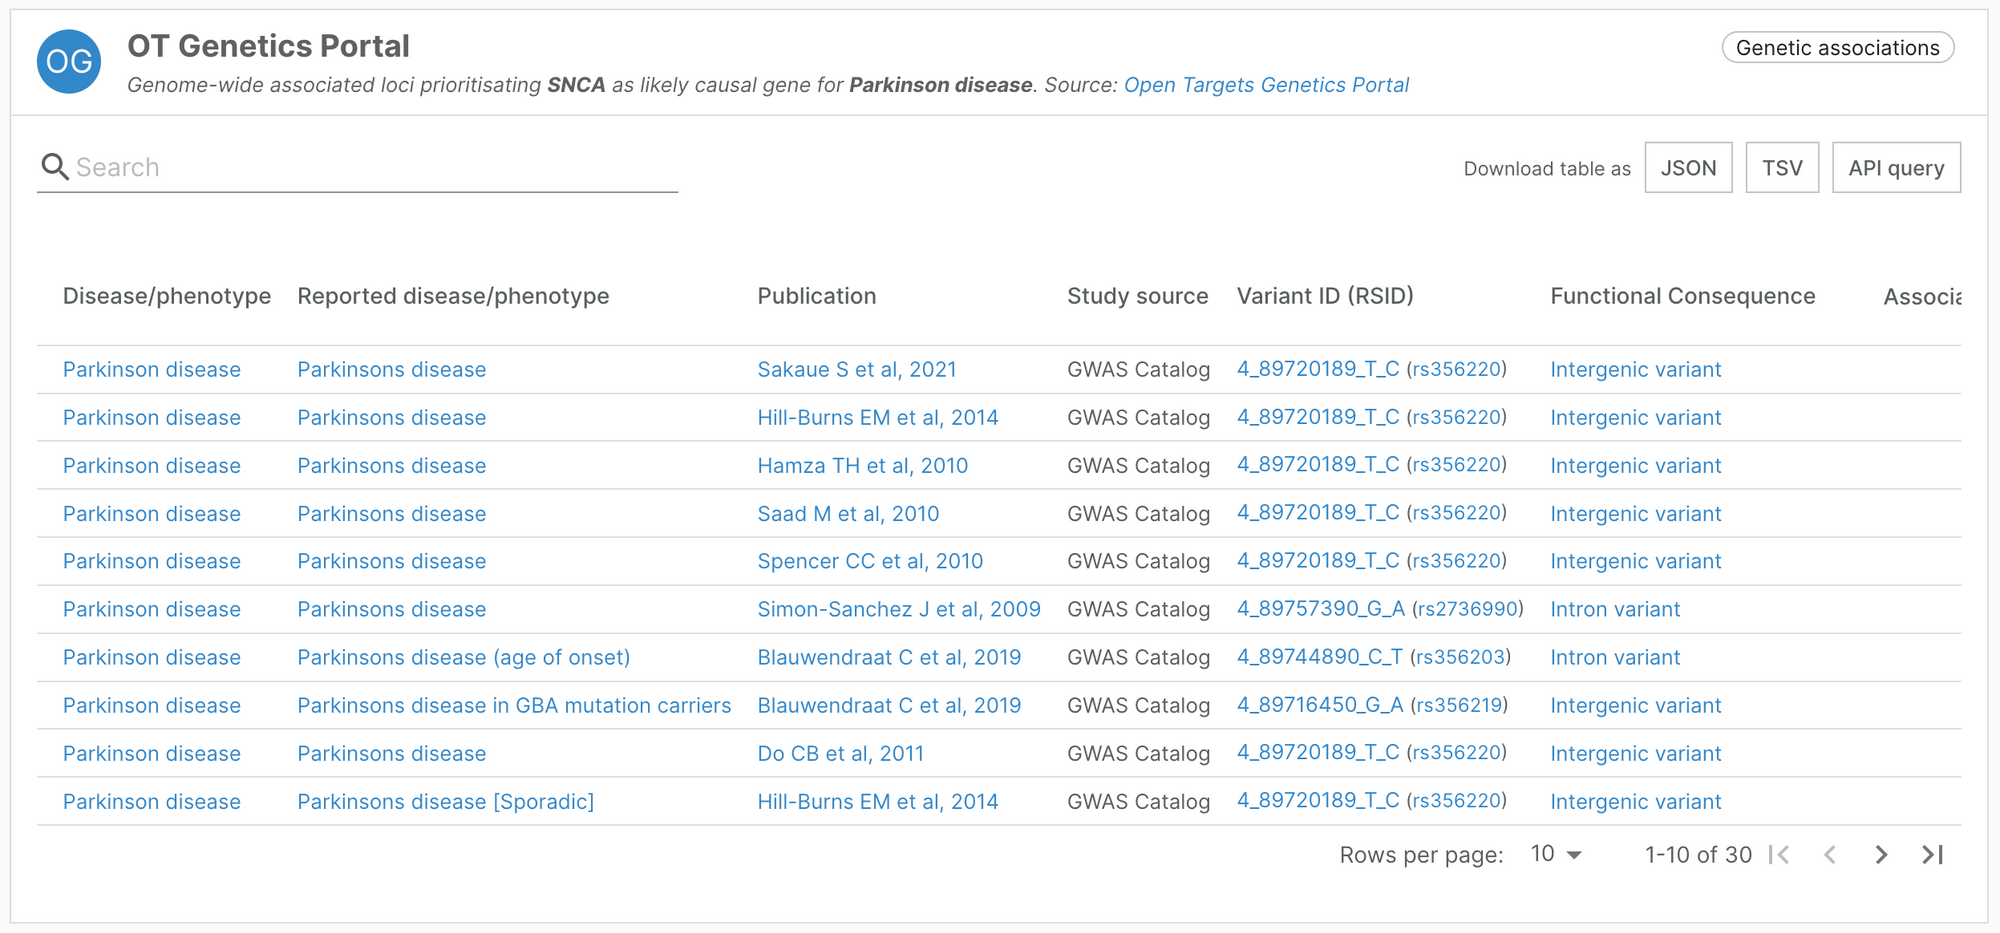 OT Genetics Portal widget in the Open Targets Platform, showing genome-wide associated loci prioritising SNCA as likely causal gene for Parkinson's disease. There are 30 entries in total.